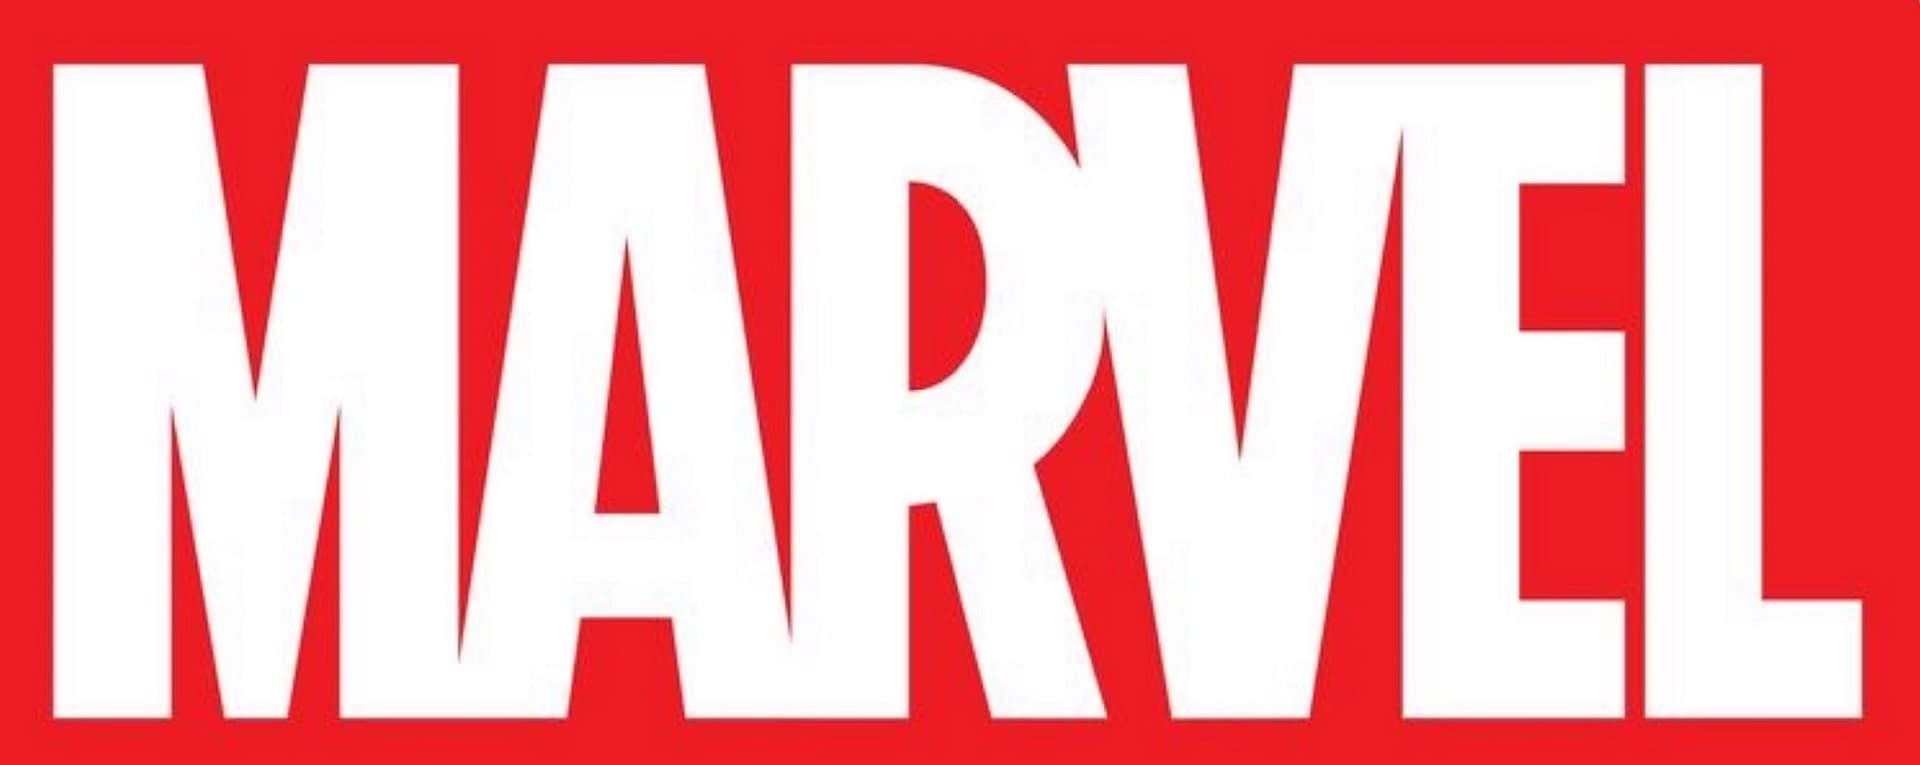 Marvel Tells More Comics Creators To Stop Work For Now